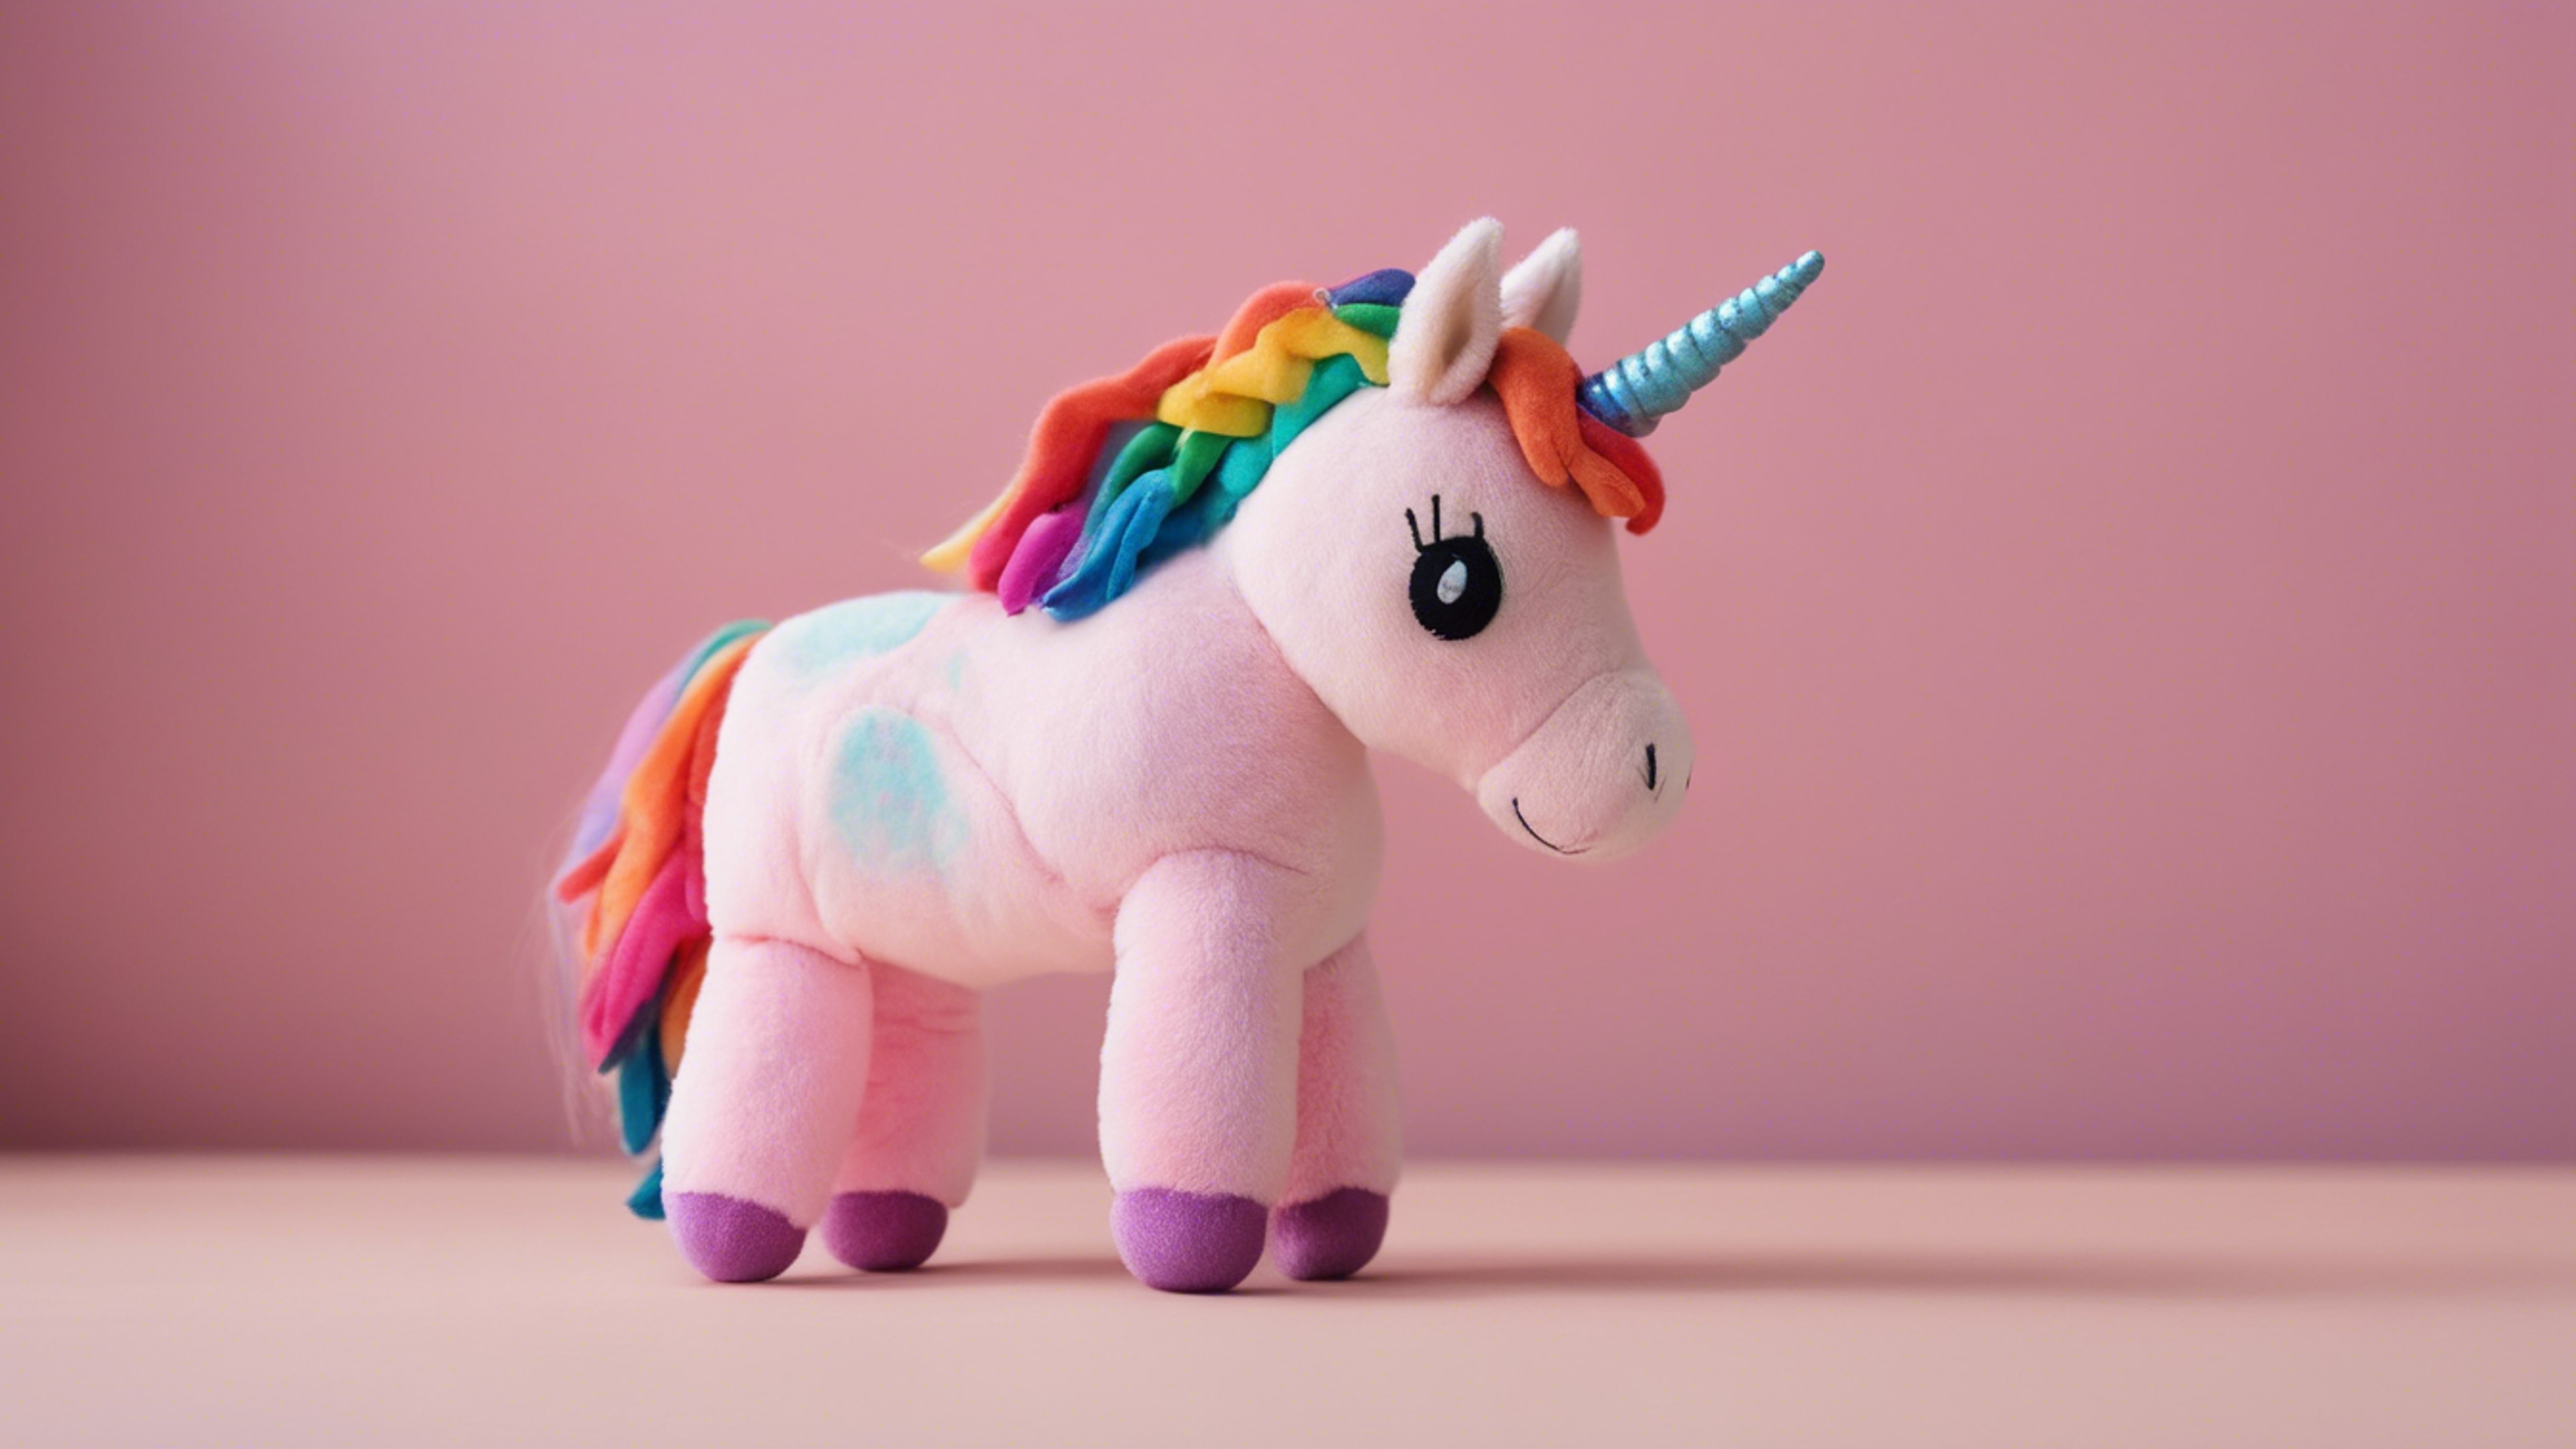 A rainbow-colored unicorn plushie in front of a pastel pink wall.壁紙[b4b7619b69e941578866]